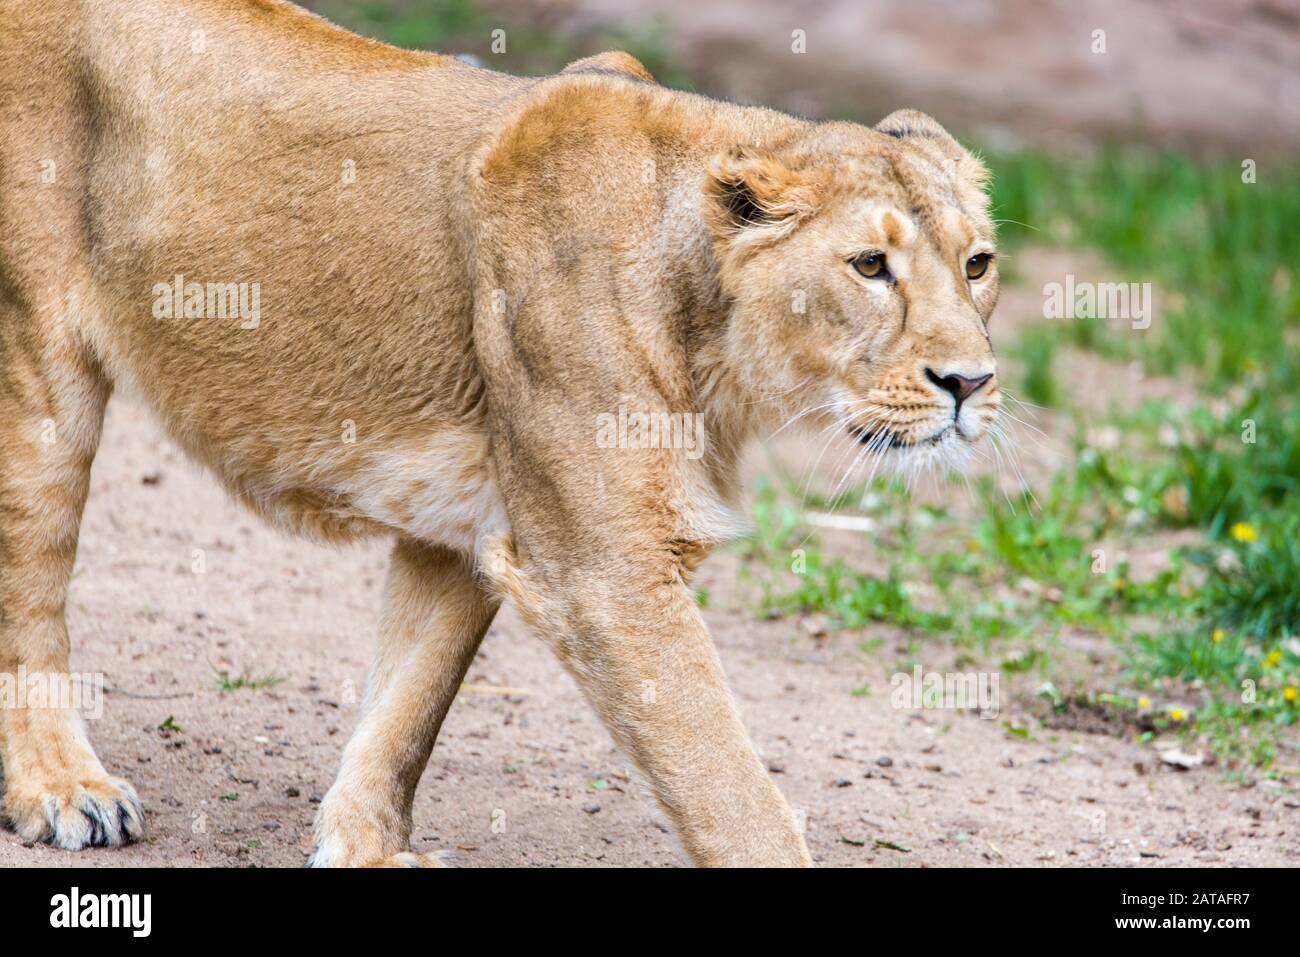 Female Lion, Panthera Leo, Lionesse Portrait. Image Of A Female African ...